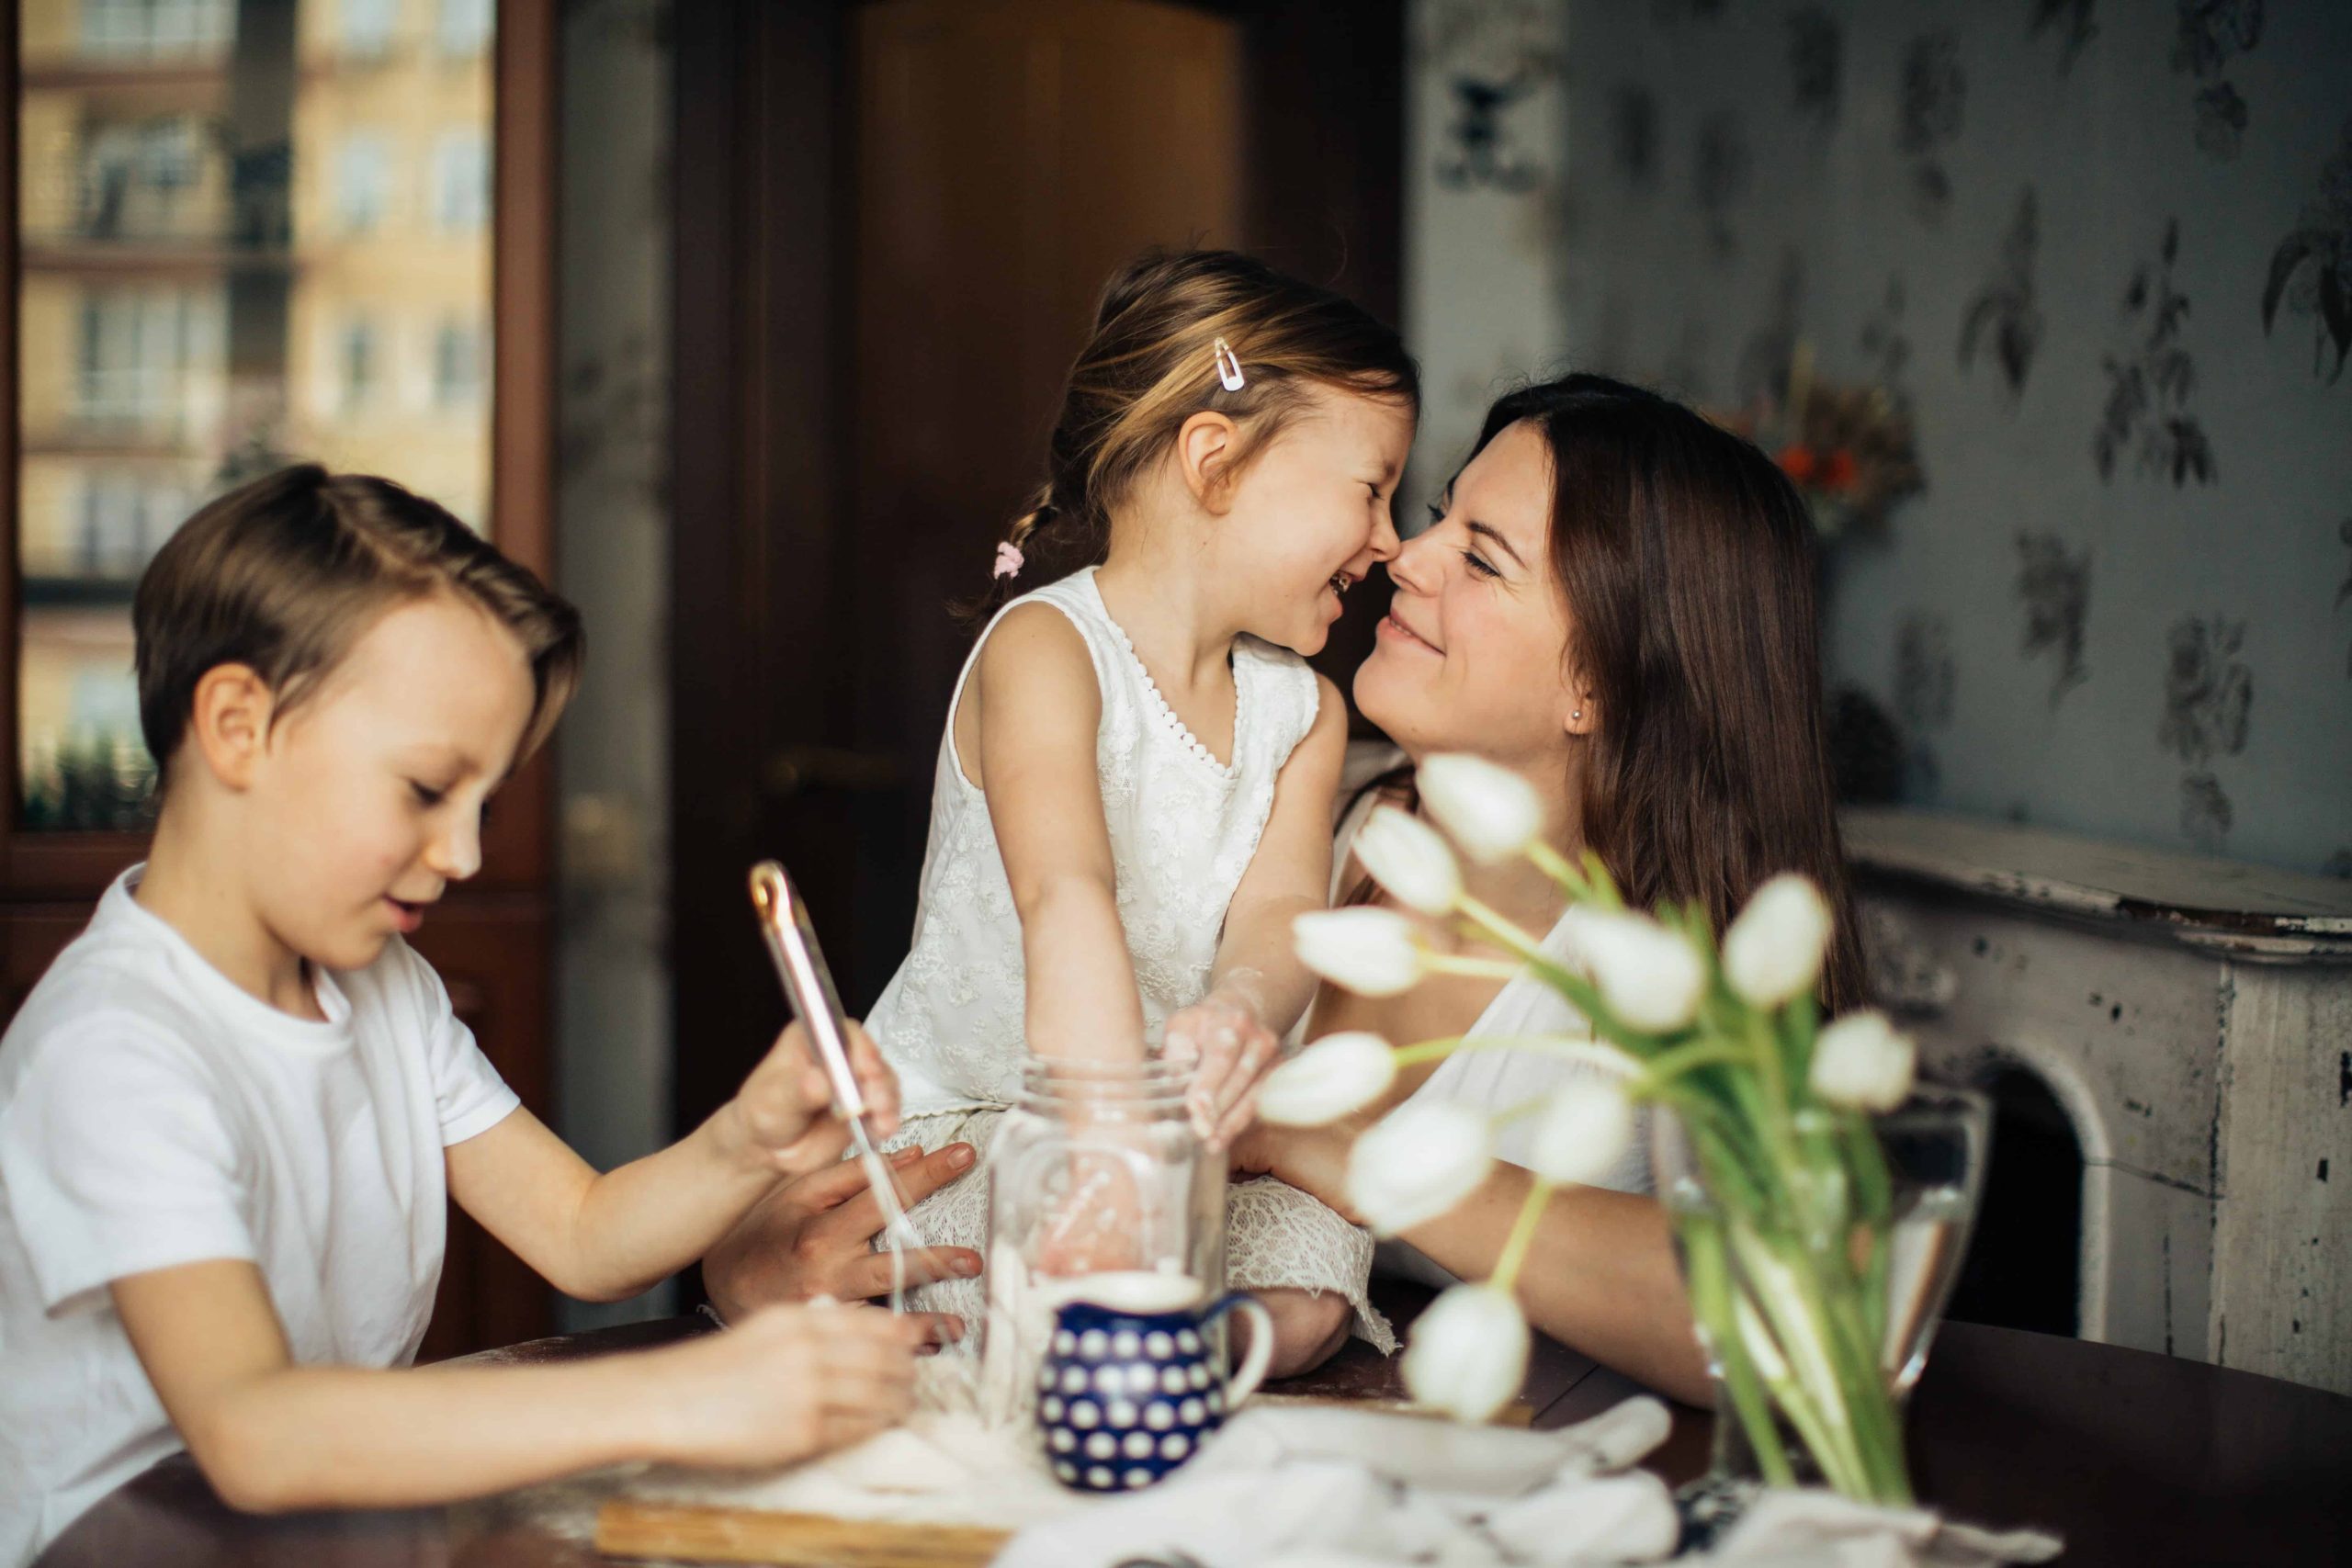 Two kids sitting at the table with their mother